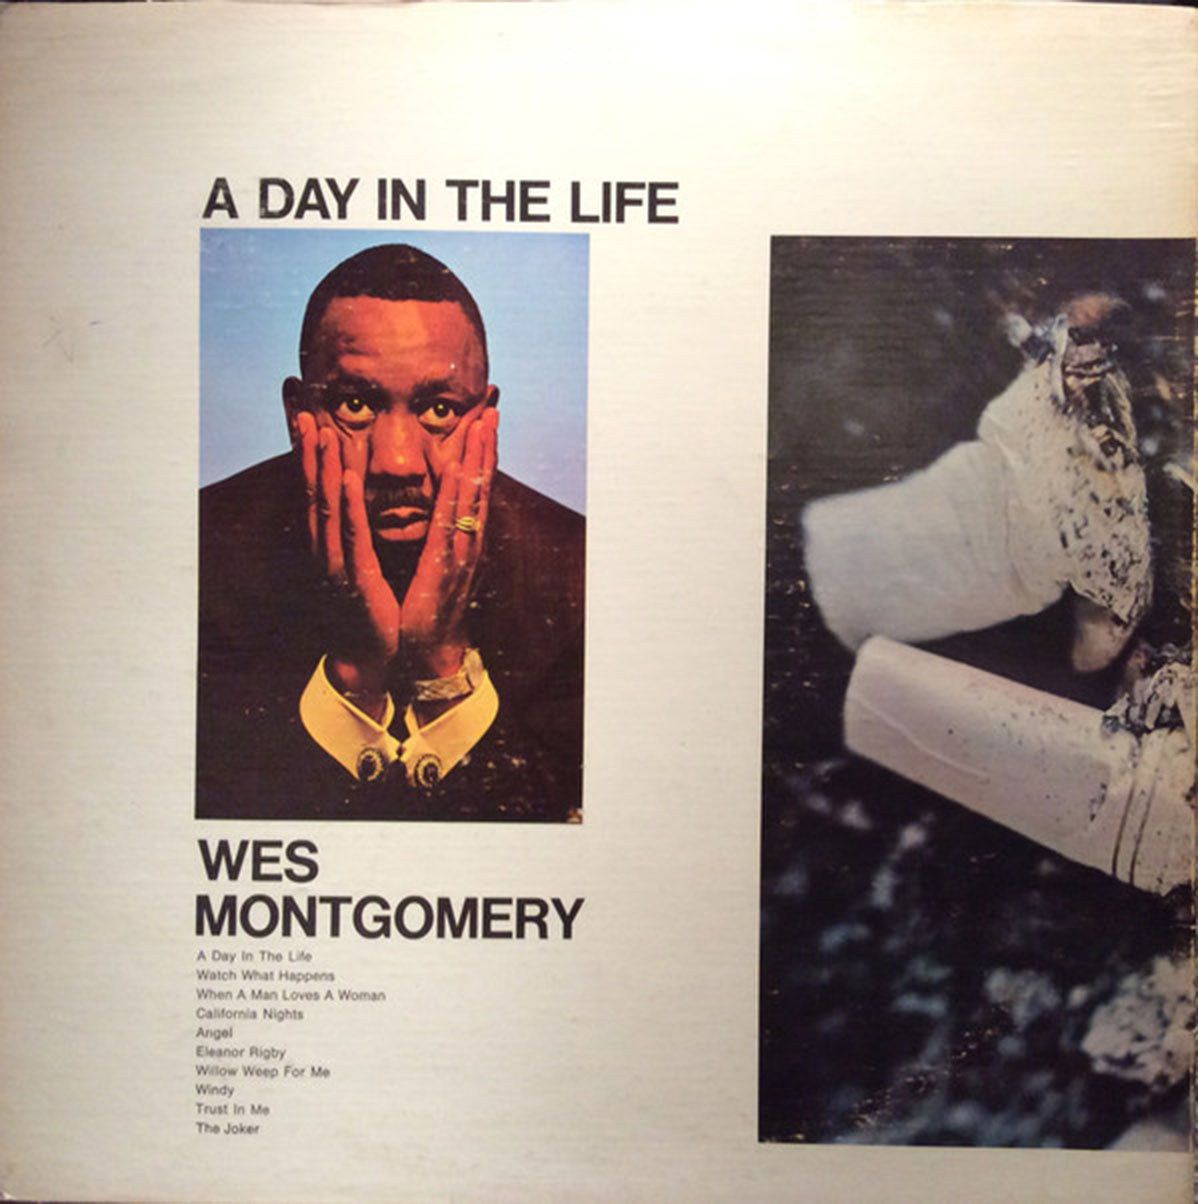 Wes Montgomery – A Day In The Life